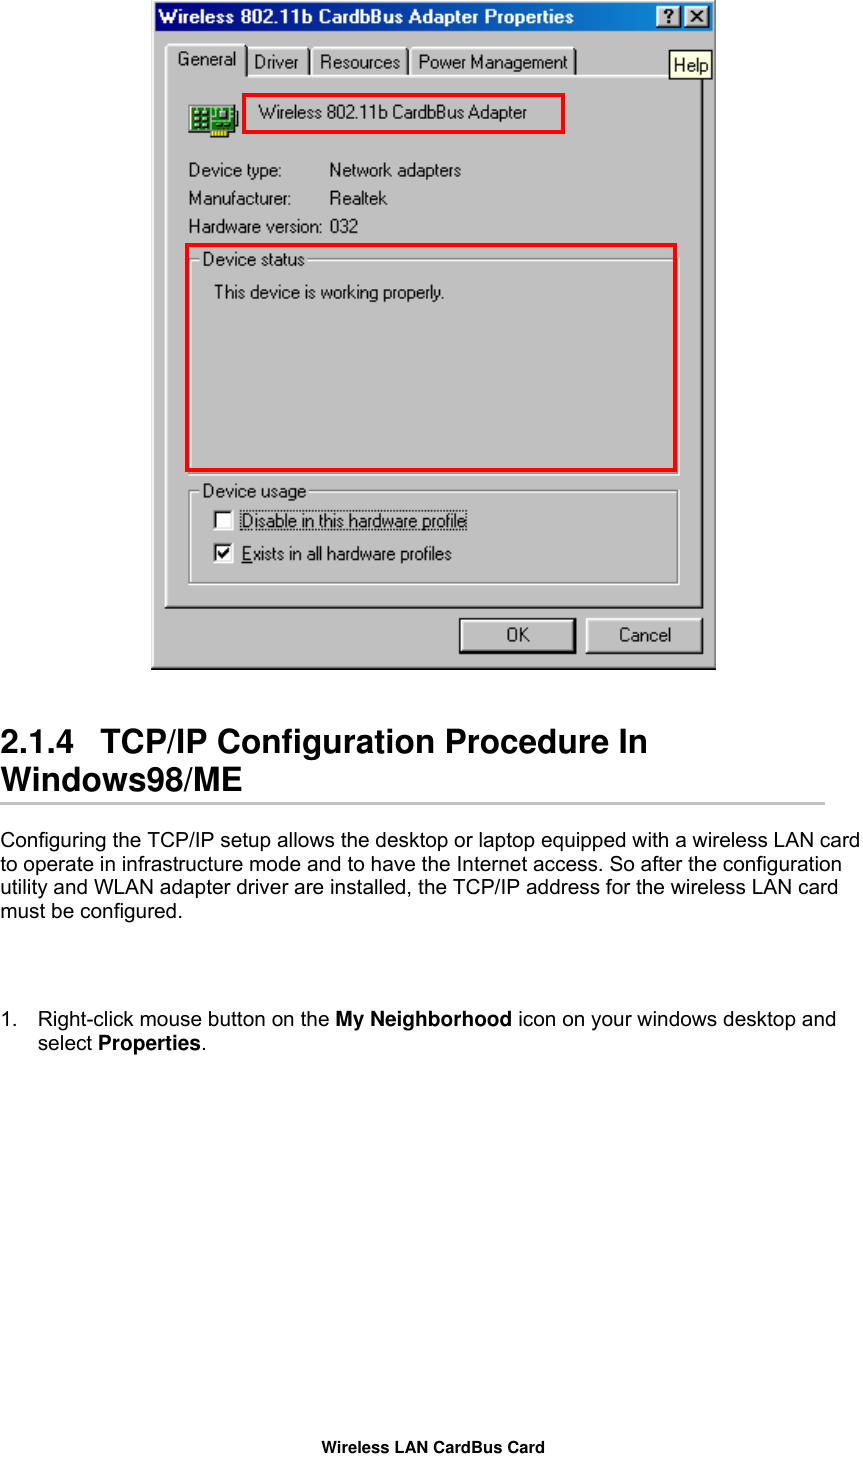    2.1.4   TCP/IP Configuration Procedure In Windows98/ME  Configuring the TCP/IP setup allows the desktop or laptop equipped with a wireless LAN card to operate in infrastructure mode and to have the Internet access. So after the configuration utility and WLAN adapter driver are installed, the TCP/IP address for the wireless LAN card must be configured.   1.  Right-click mouse button on the My Neighborhood icon on your windows desktop and select Properties.  Wireless LAN CardBus Card 